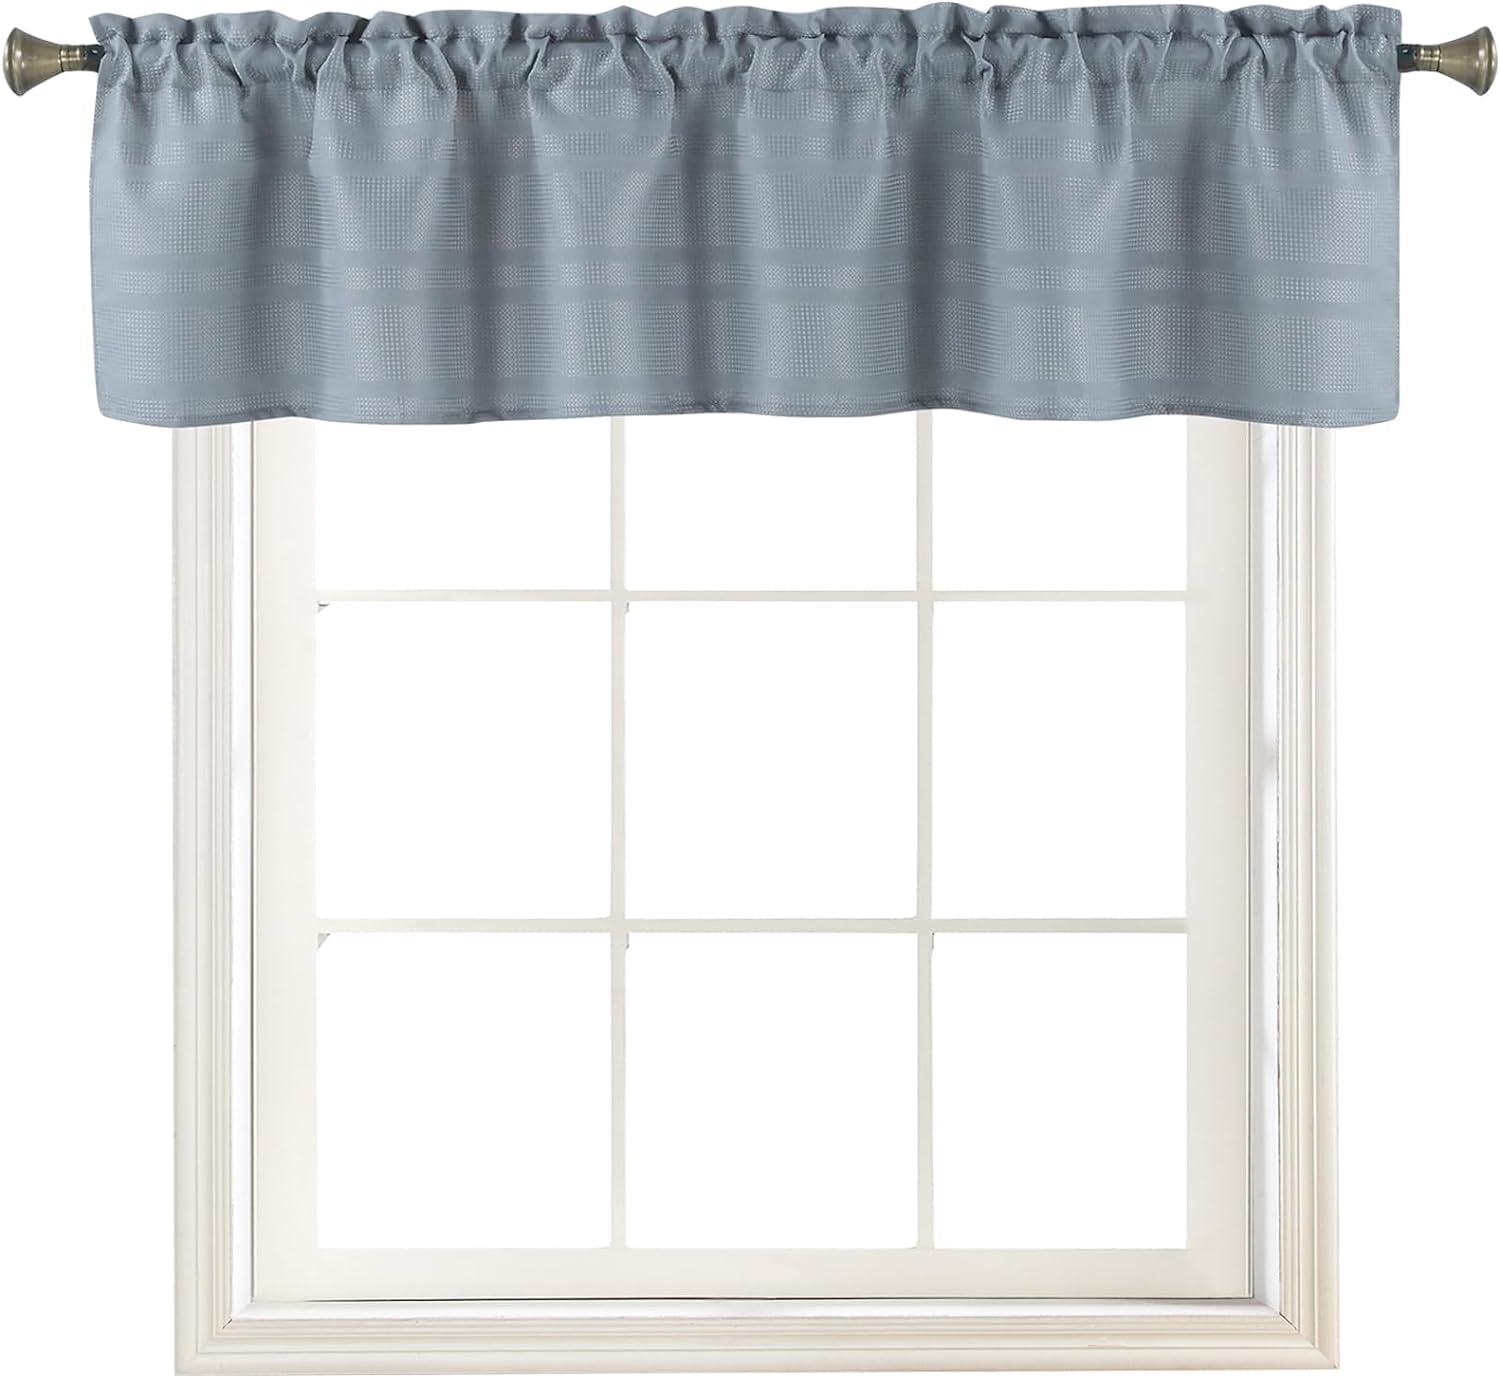 Home Queen White Waffle Bathroom Window Curtains, Water Repellent Rod Pocket Short Kitchen Drapes for Small Window, W 30 X L24 Each